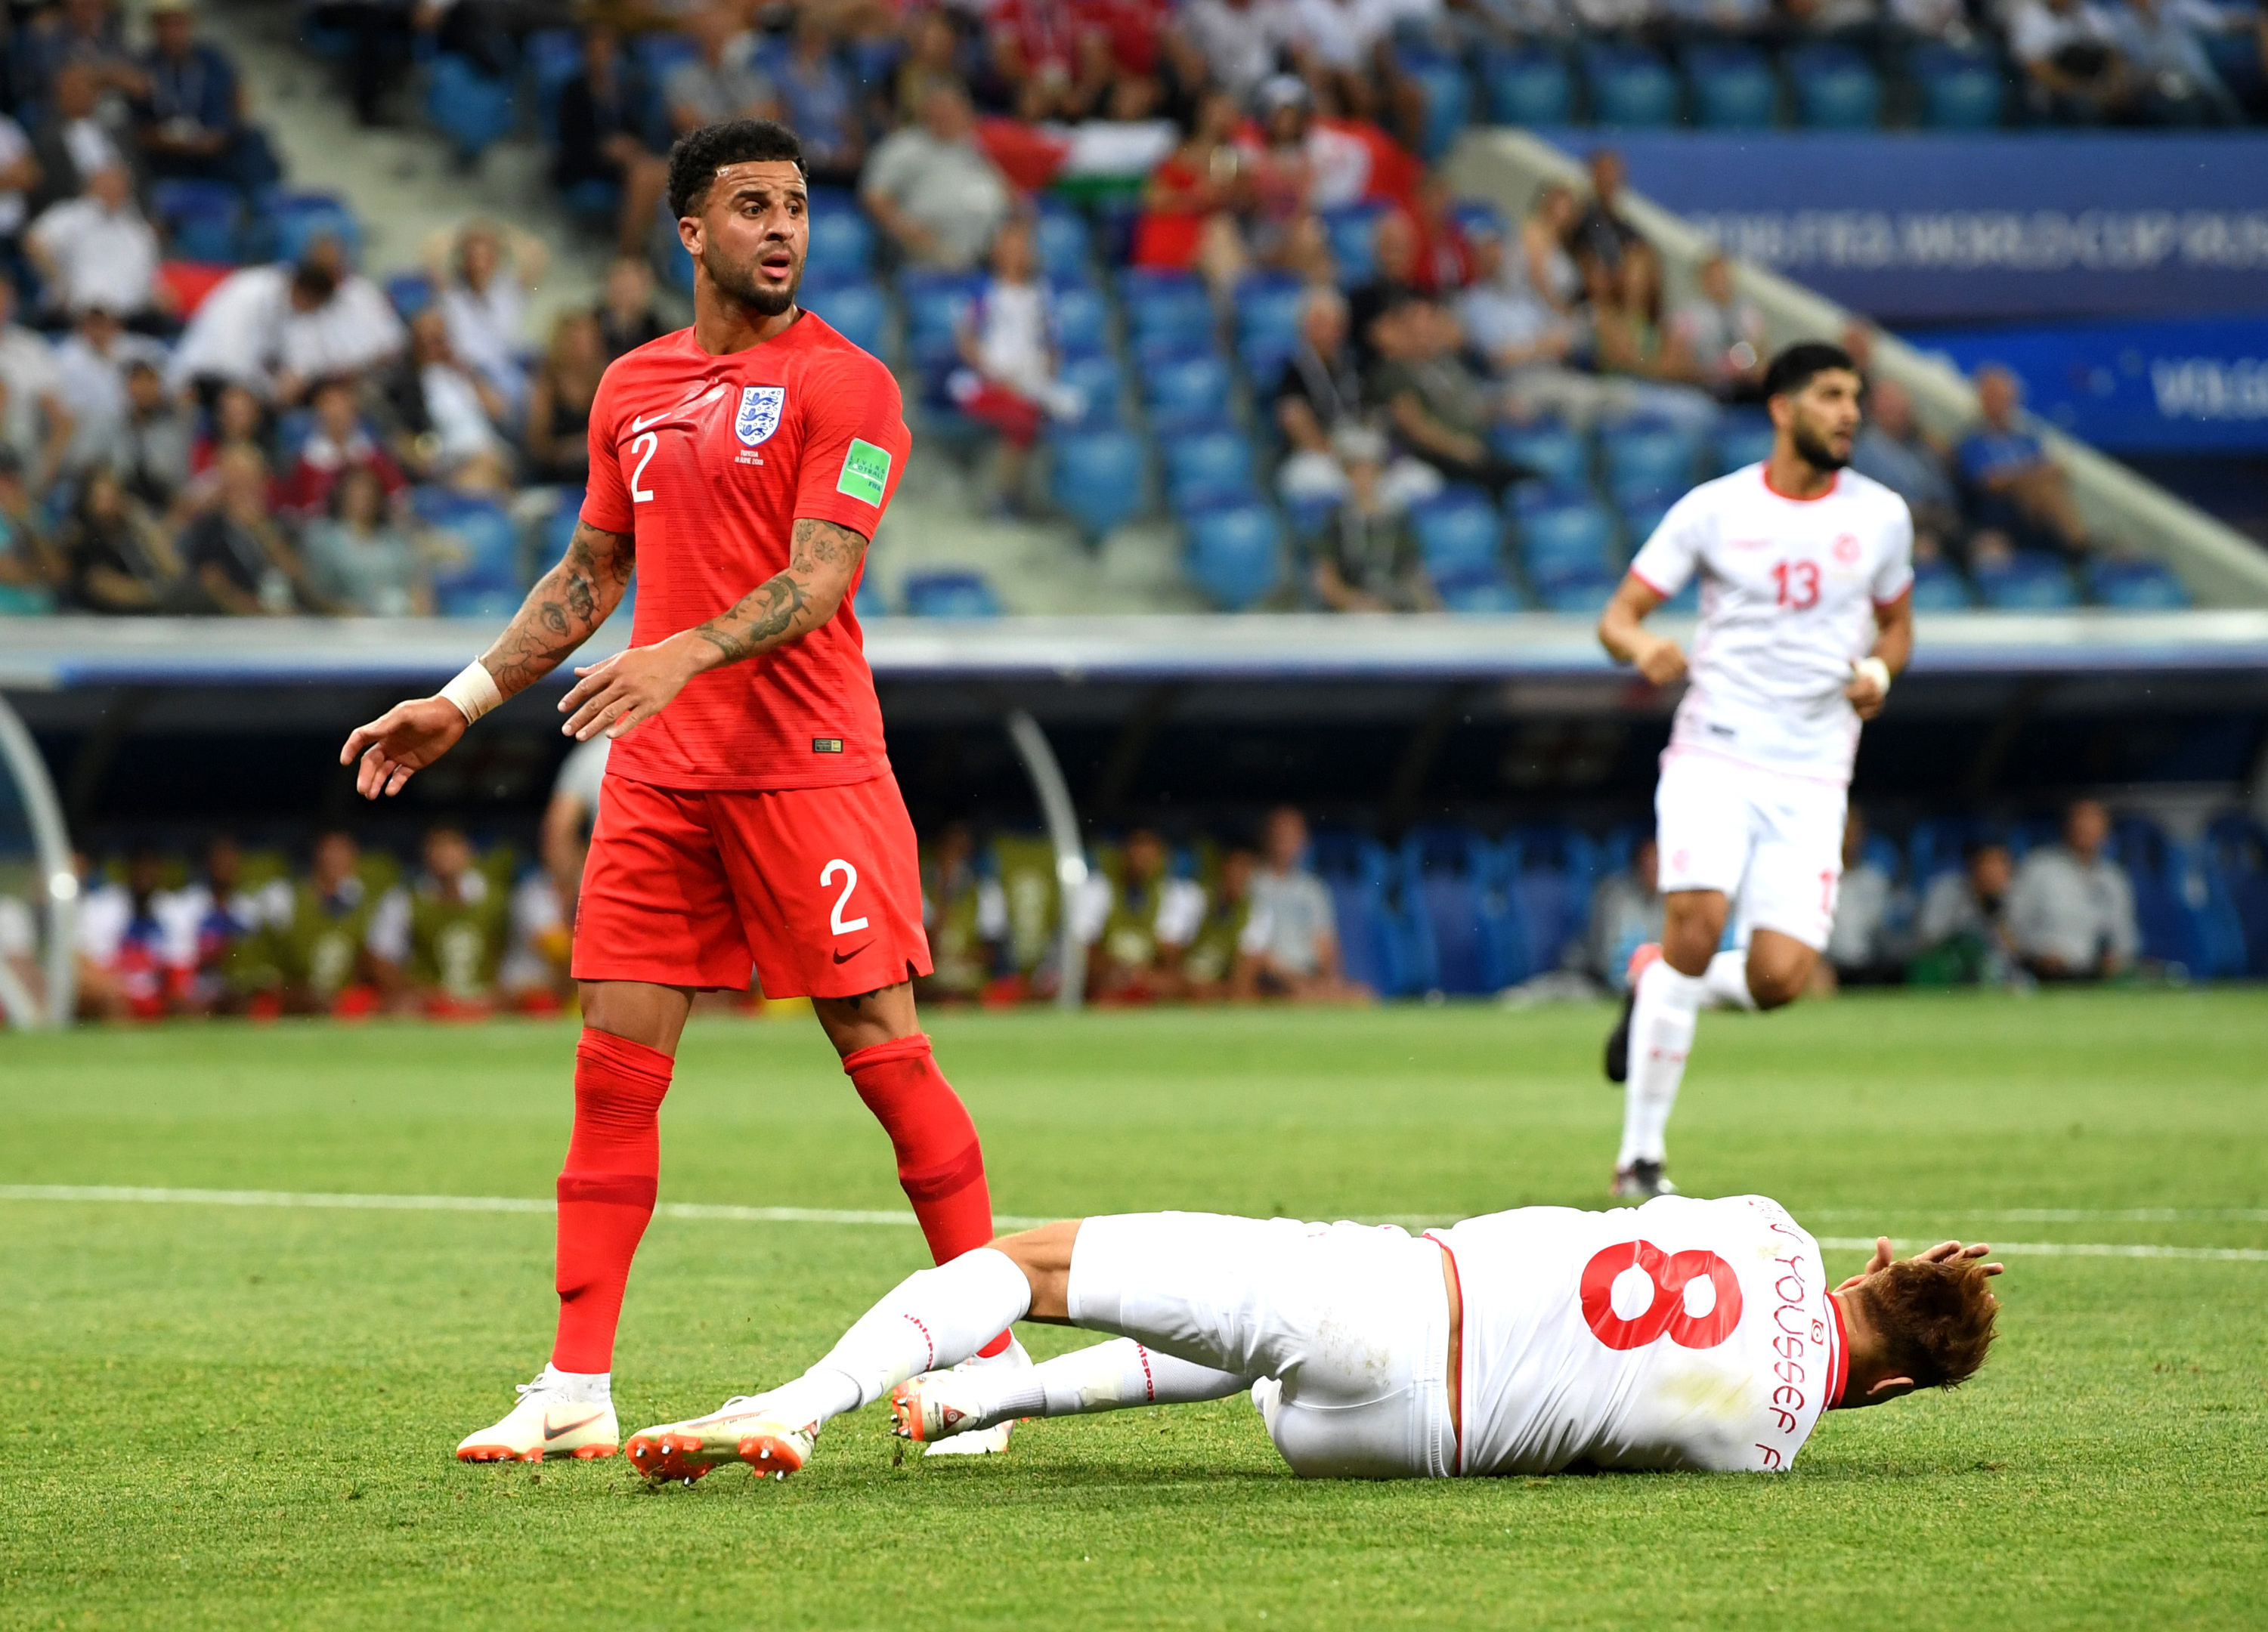 Fakhreddine Ben Youssef of Tunisia goes down in penalty area under challenge from Kyle Walker (Matthias Hangst/Getty Images)